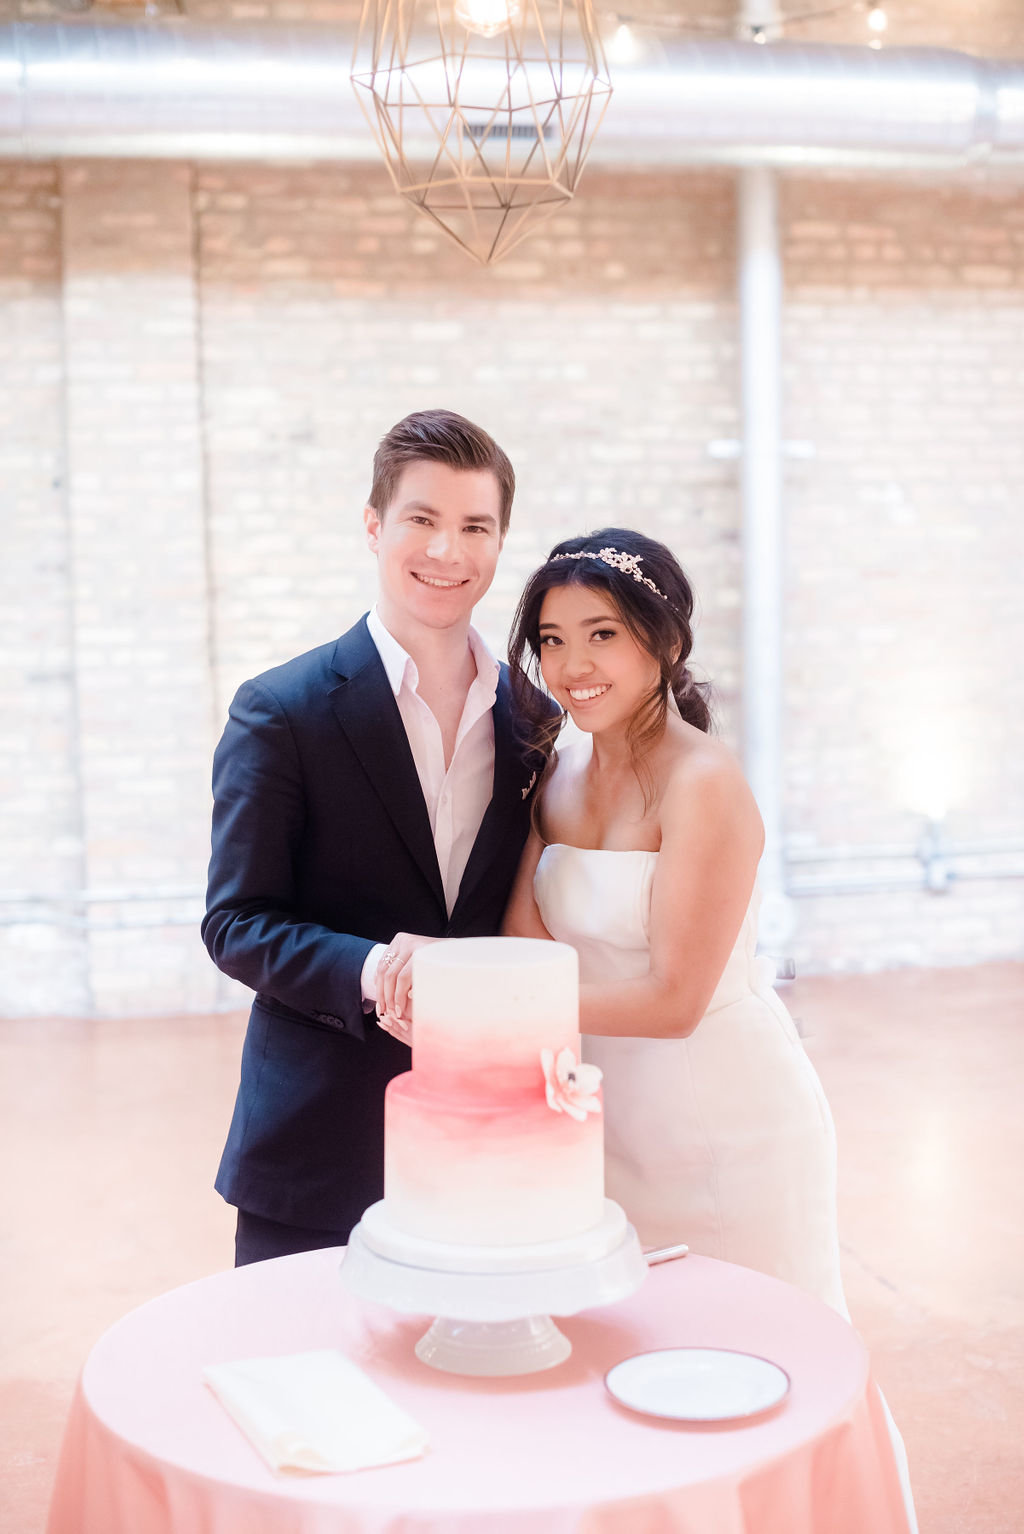 A smiling man and woman holding hands in front of their wedding cake